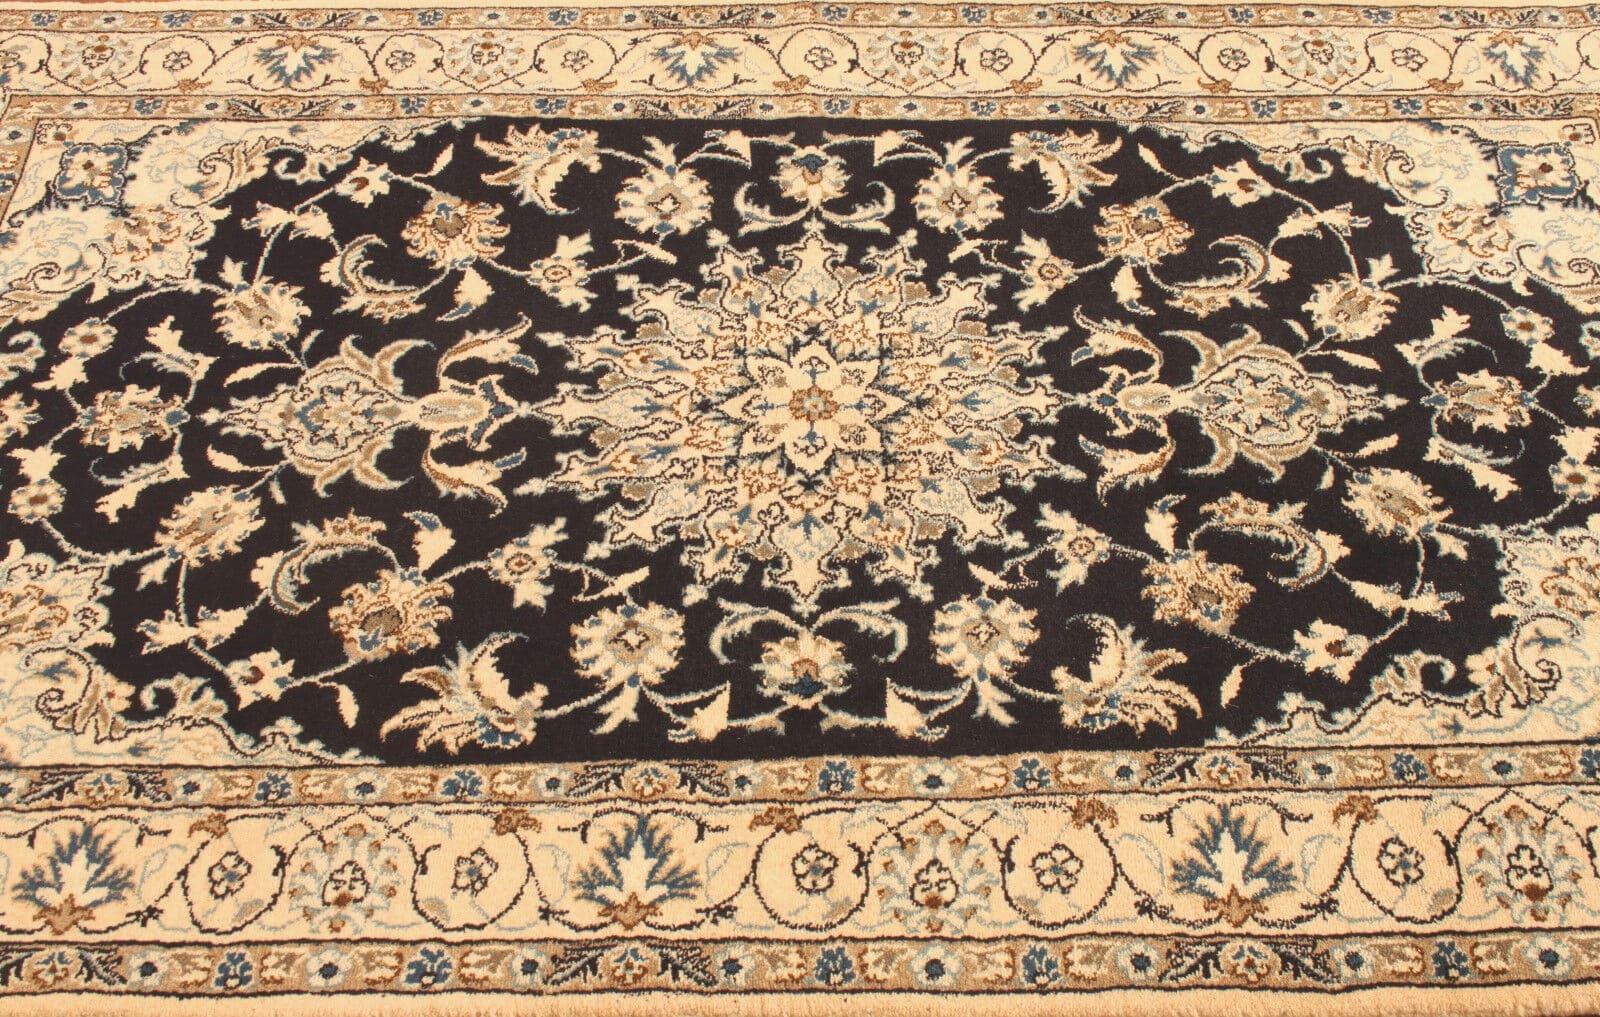 Late 20th Century Handmade Vintage Persian Style Nain Rug 3.9' x 6.6', 1980s - 1T53 For Sale